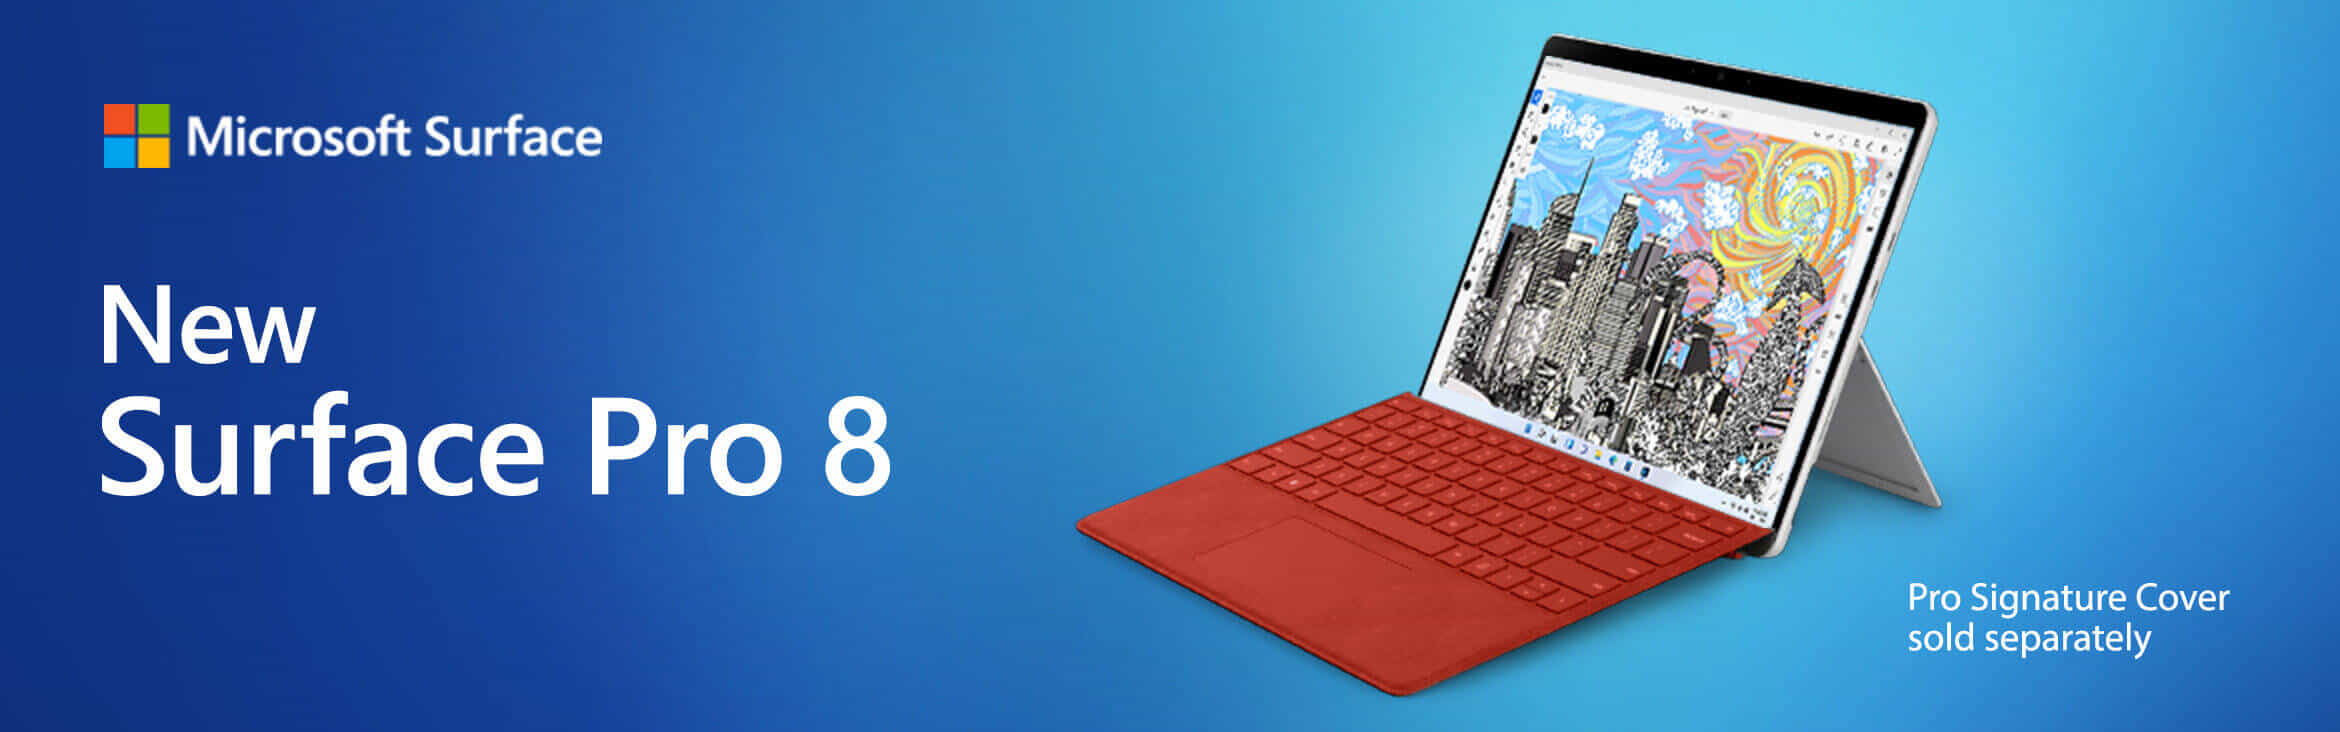 New Surface 8 Laptop | The Good Guys